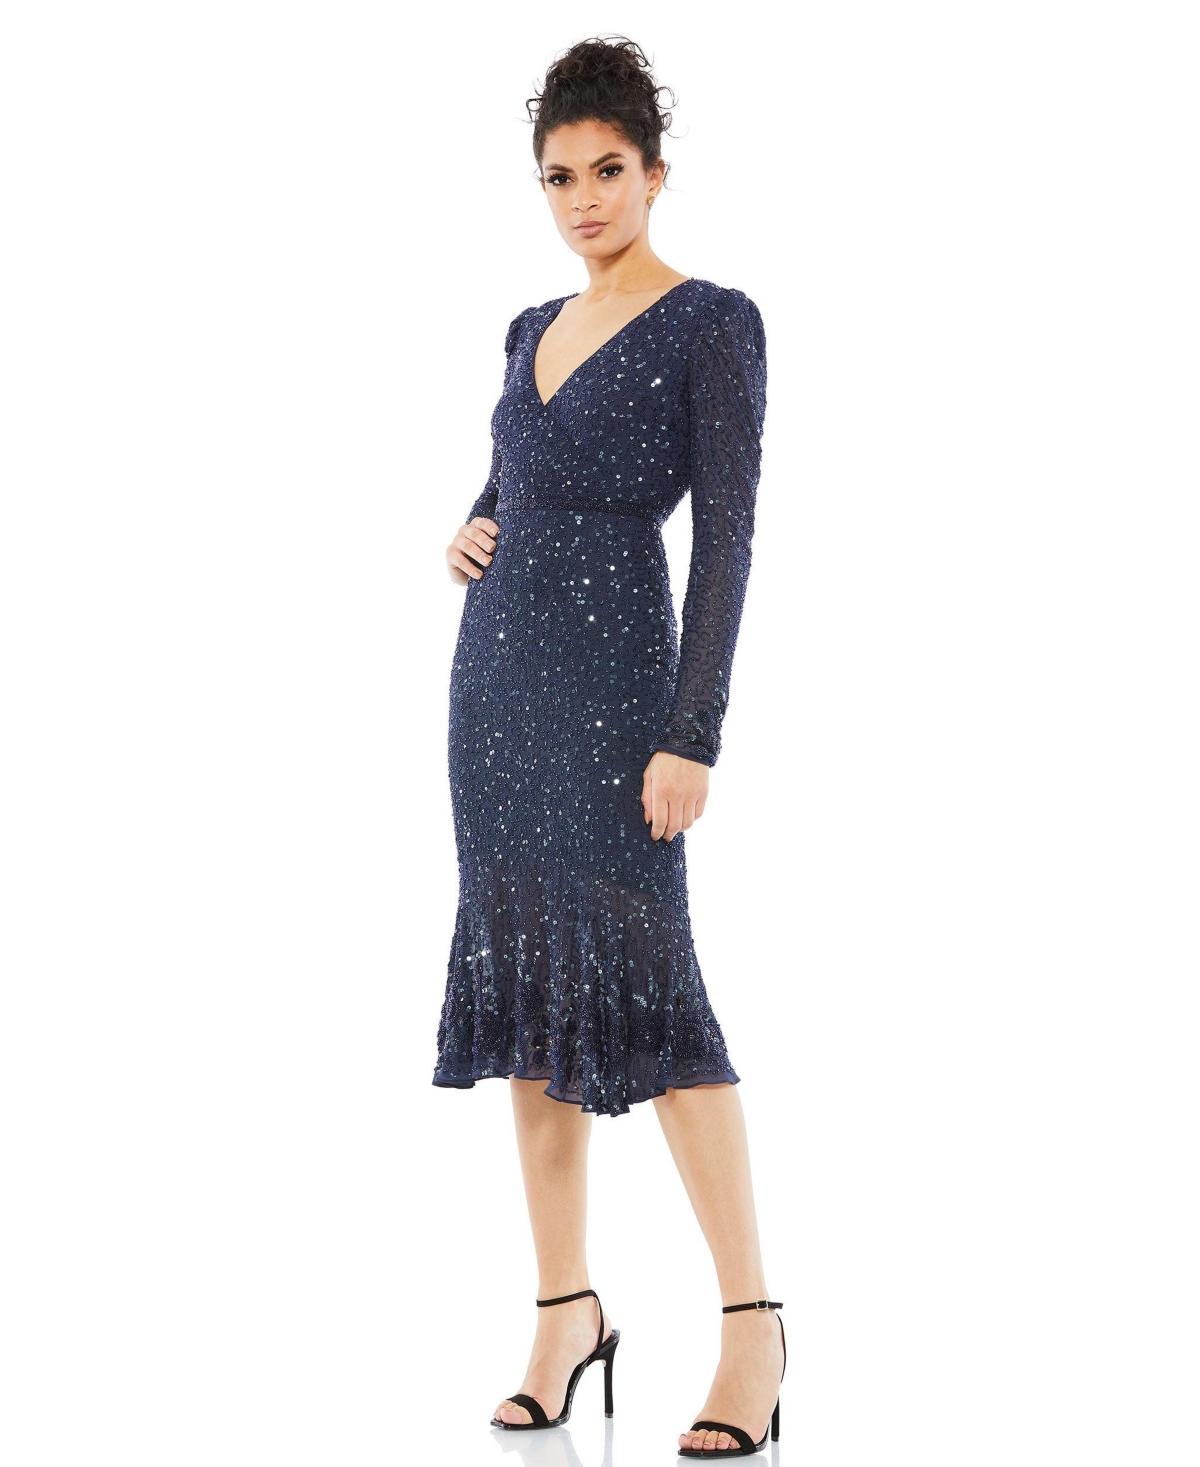 Women's Sequin Gown with Embellished Hemline and Belt - Midnight